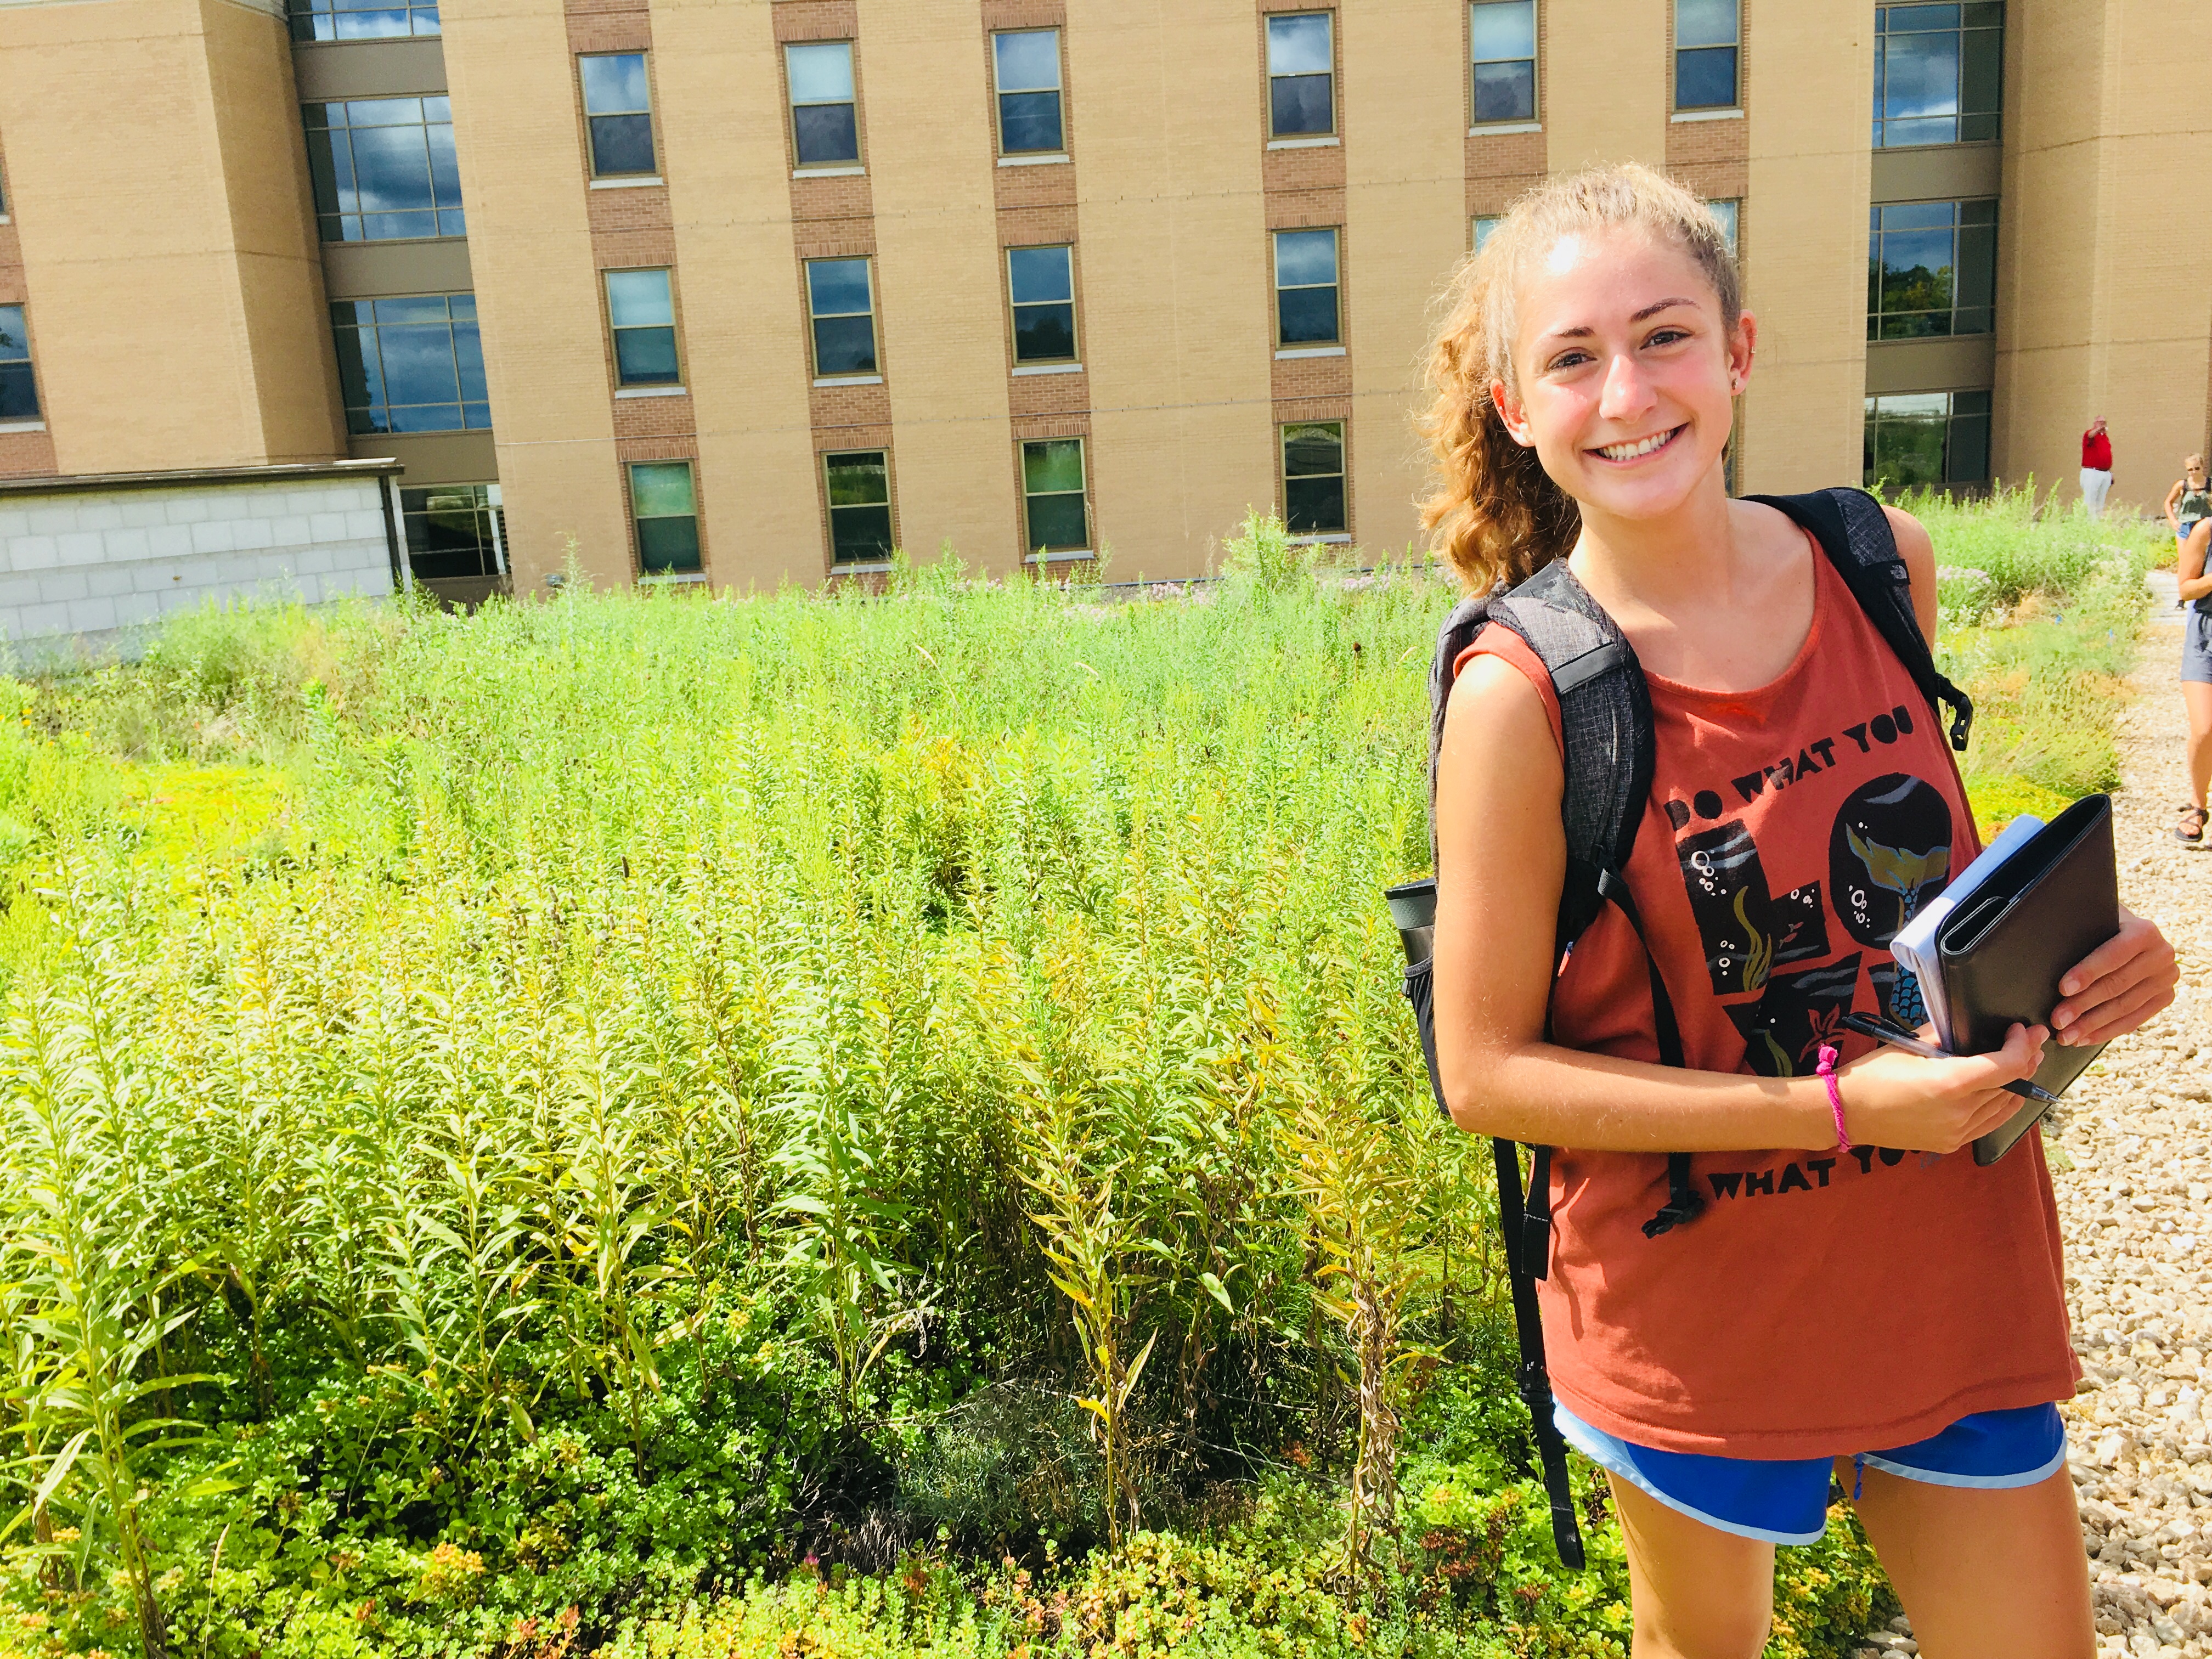 Jackie Olson, one of the Office of Sustainability interns is majoring in Landscape Architecture.